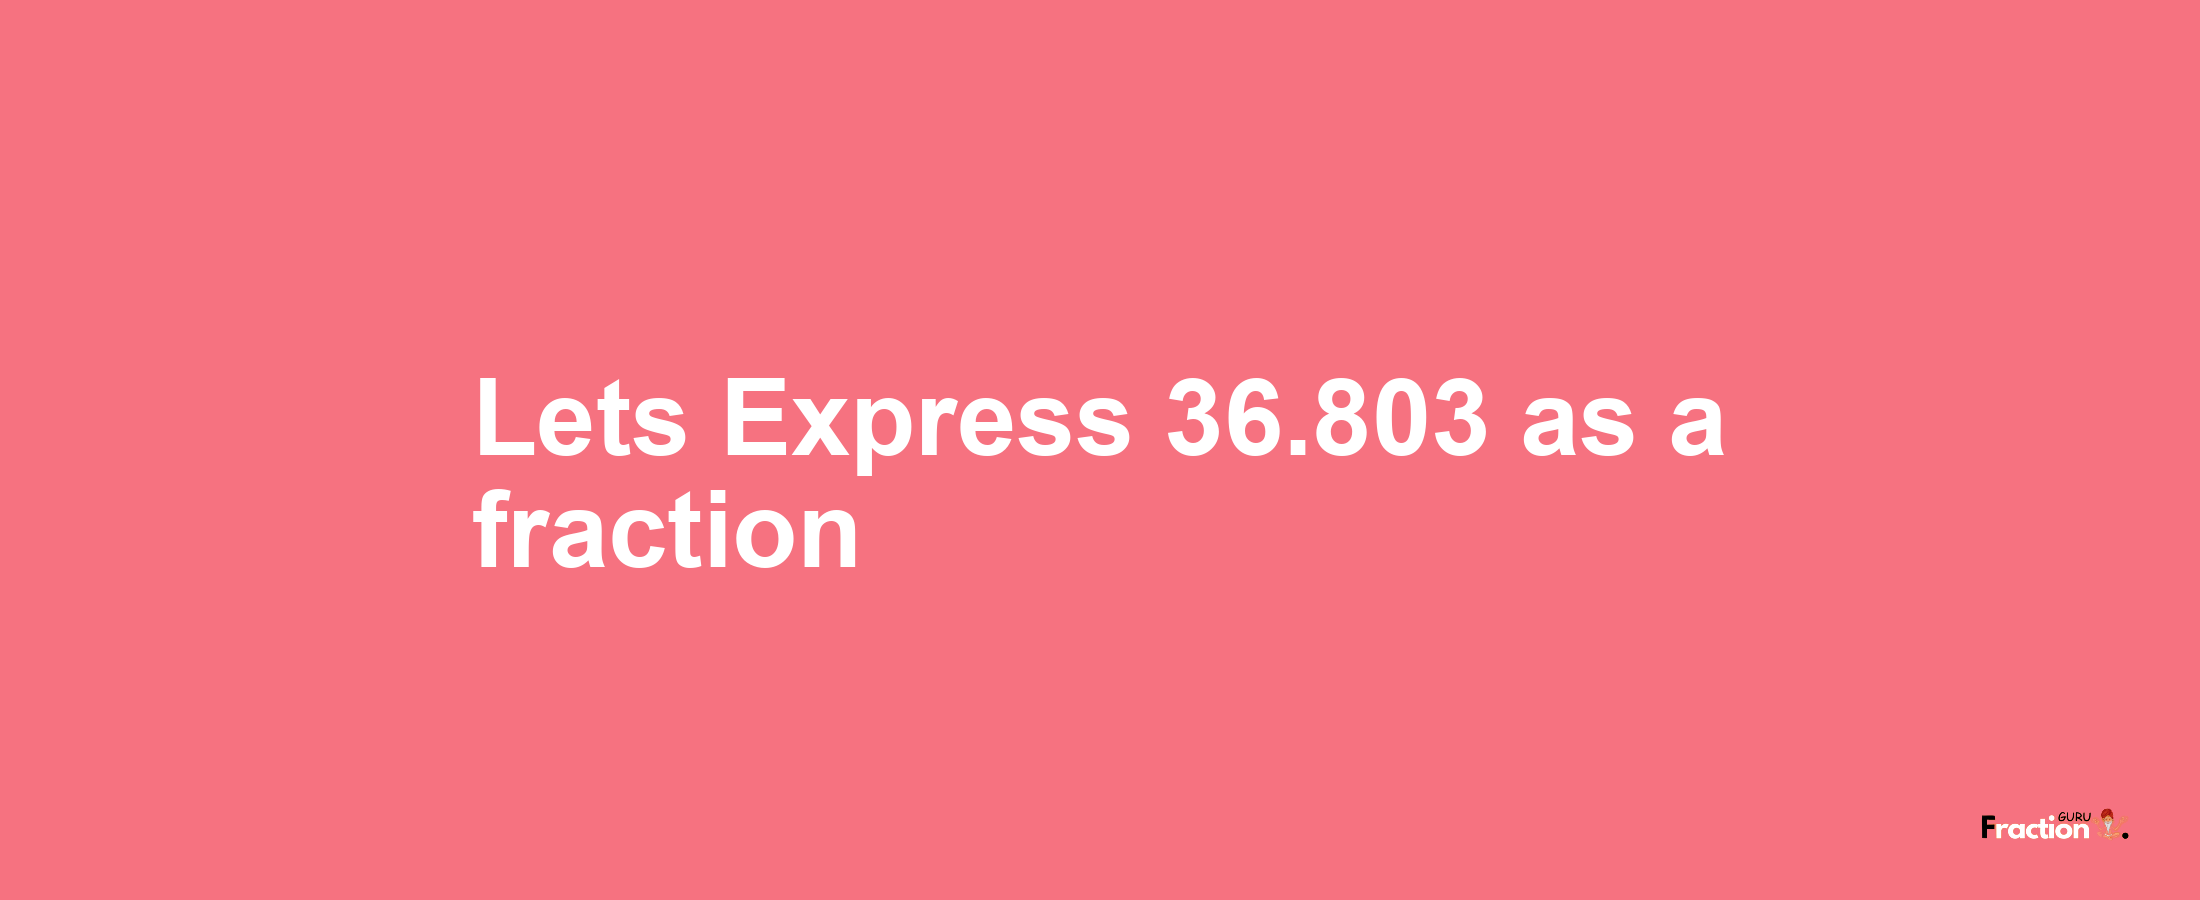 Lets Express 36.803 as afraction